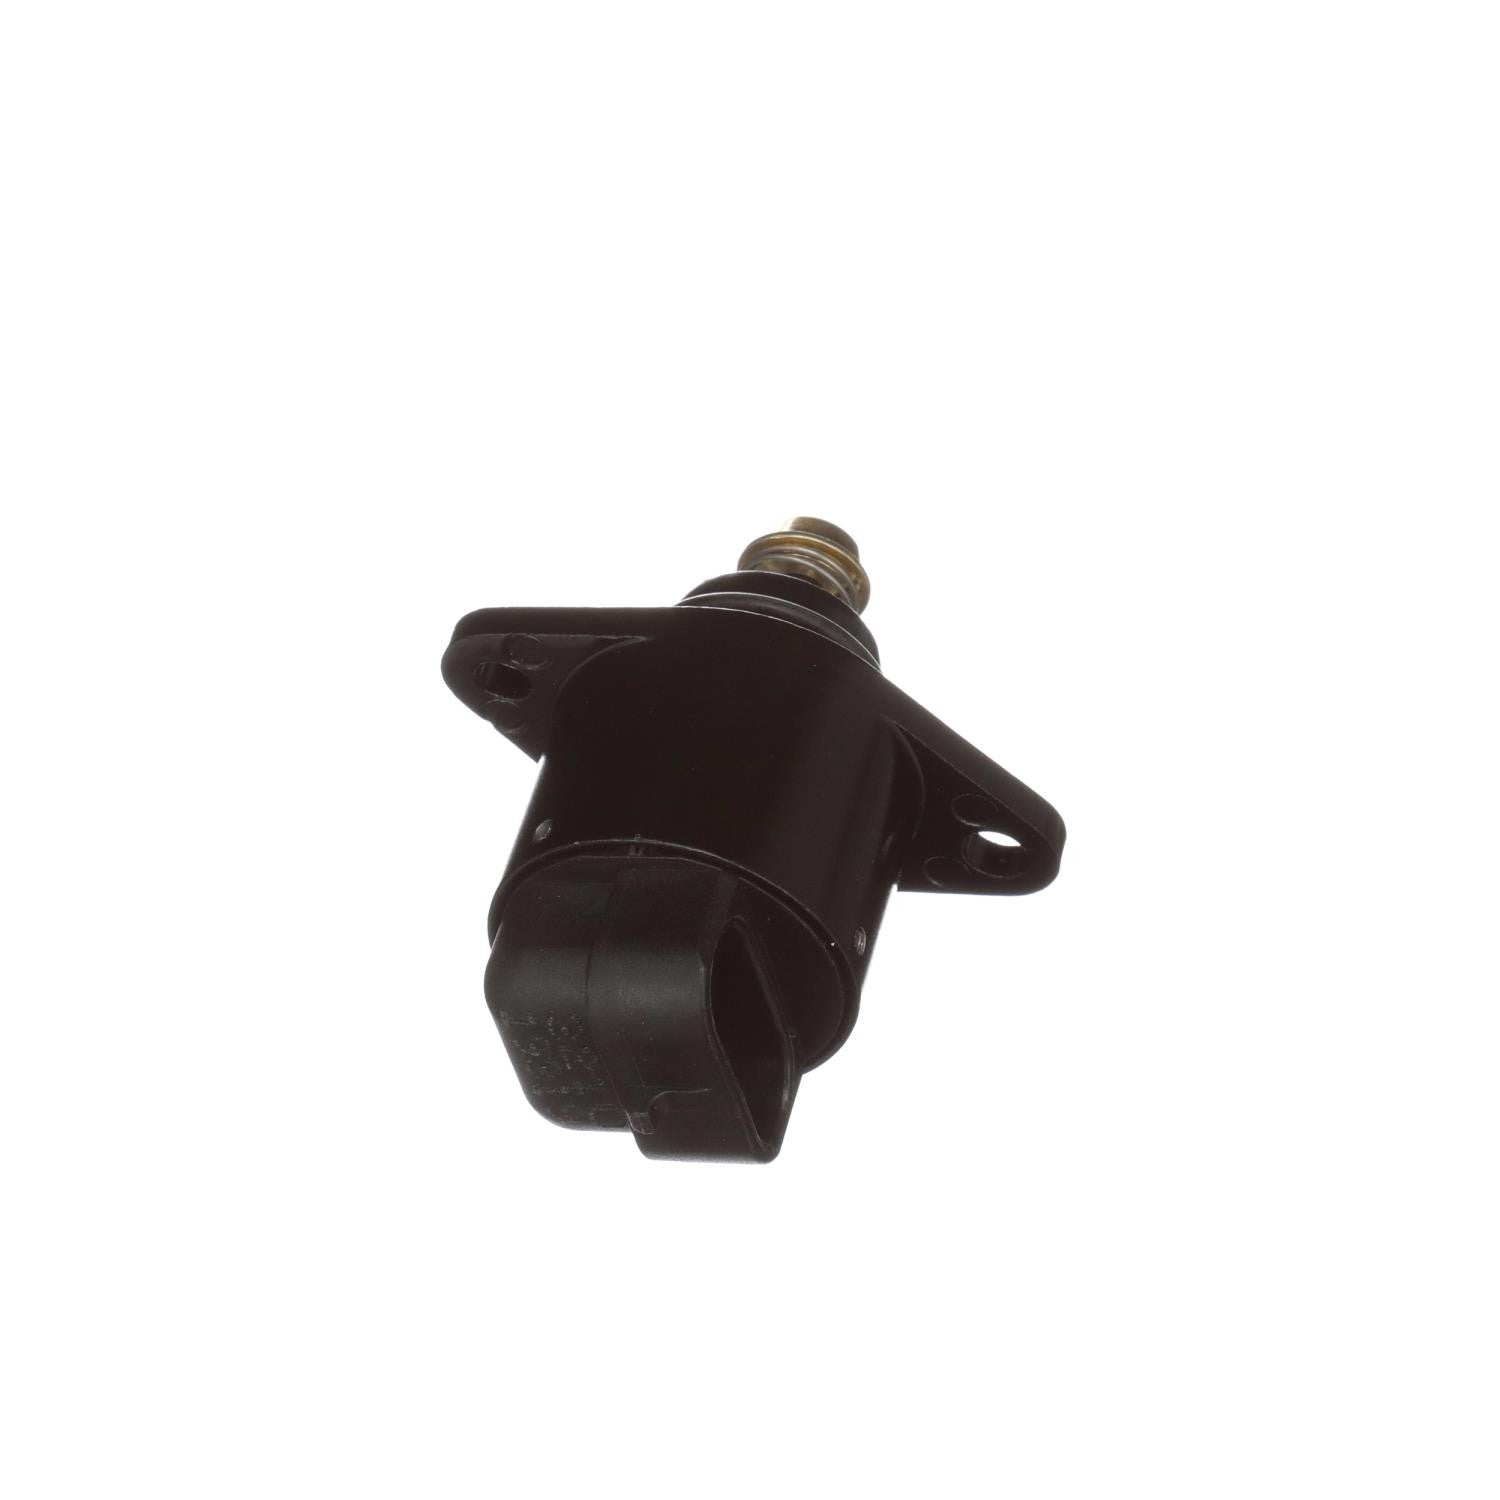 Back View of Idle Air Control Valve STANDARD IGNITION AC15Accessories 1 View of Idle Air Control Valve STANDARD IGNITION AC15